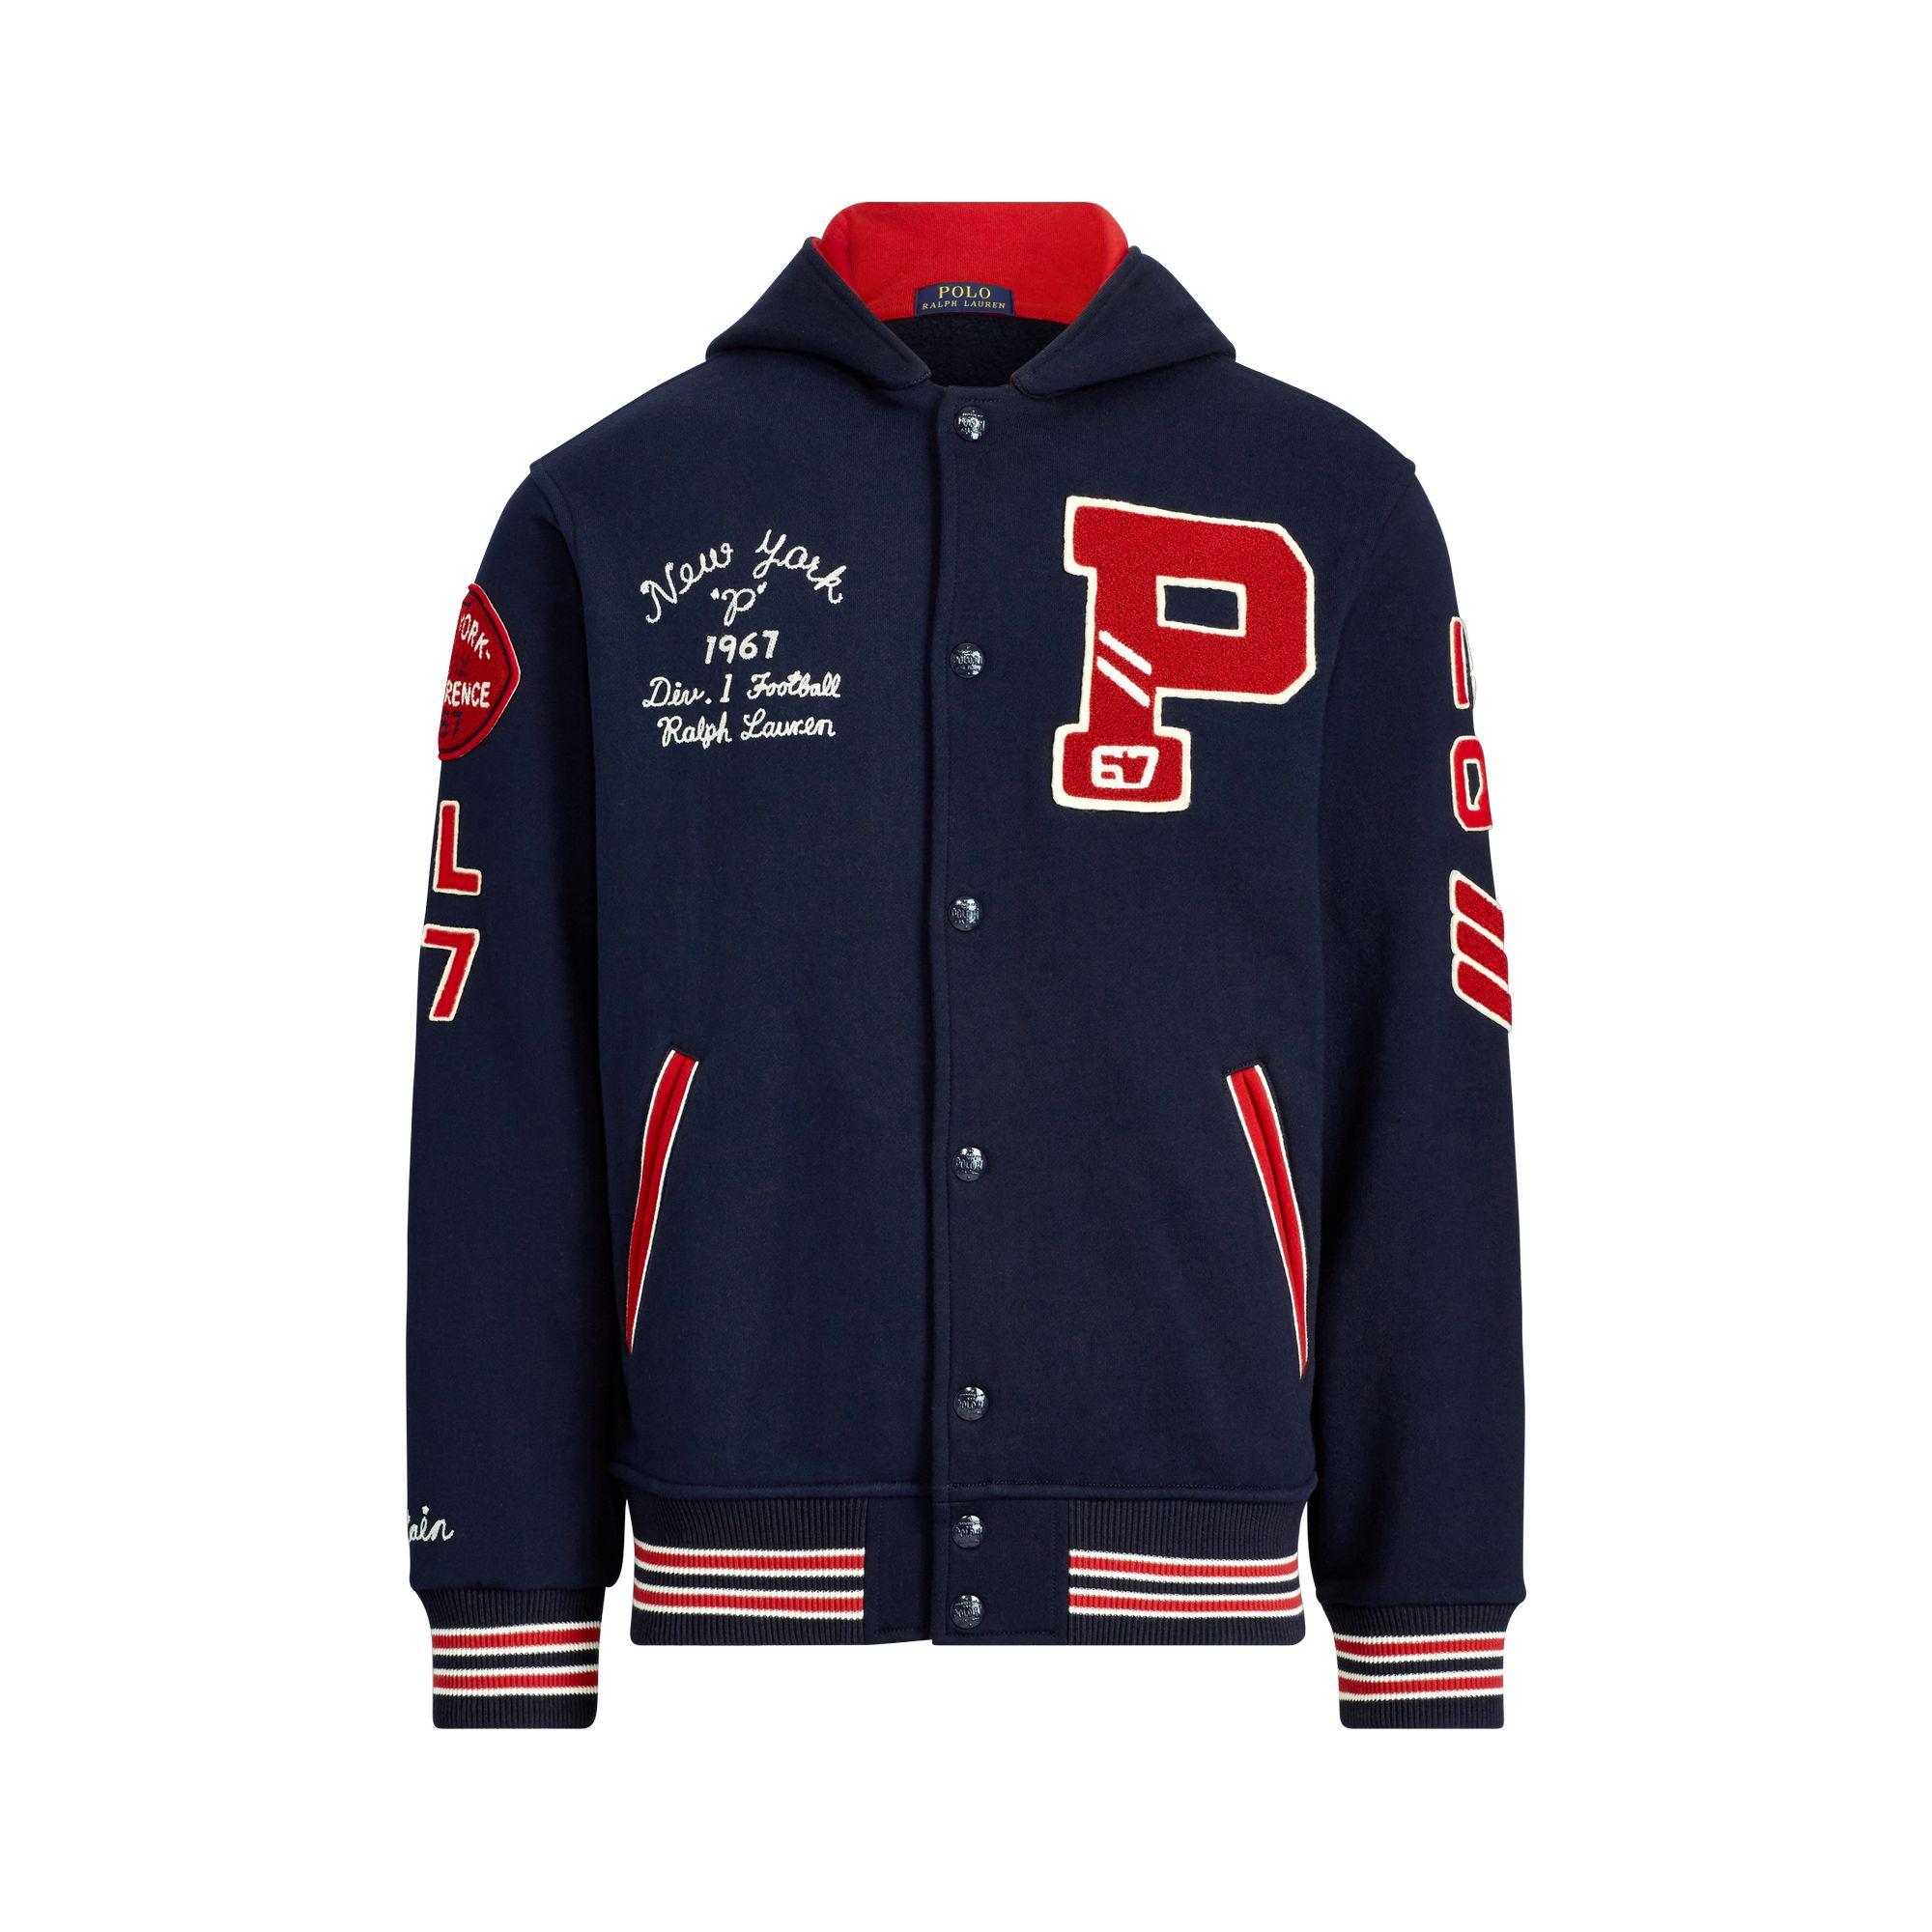 Polo Ralph Lauren Cotton Hooded Letterman Jacket in Blue for Men - Save ...